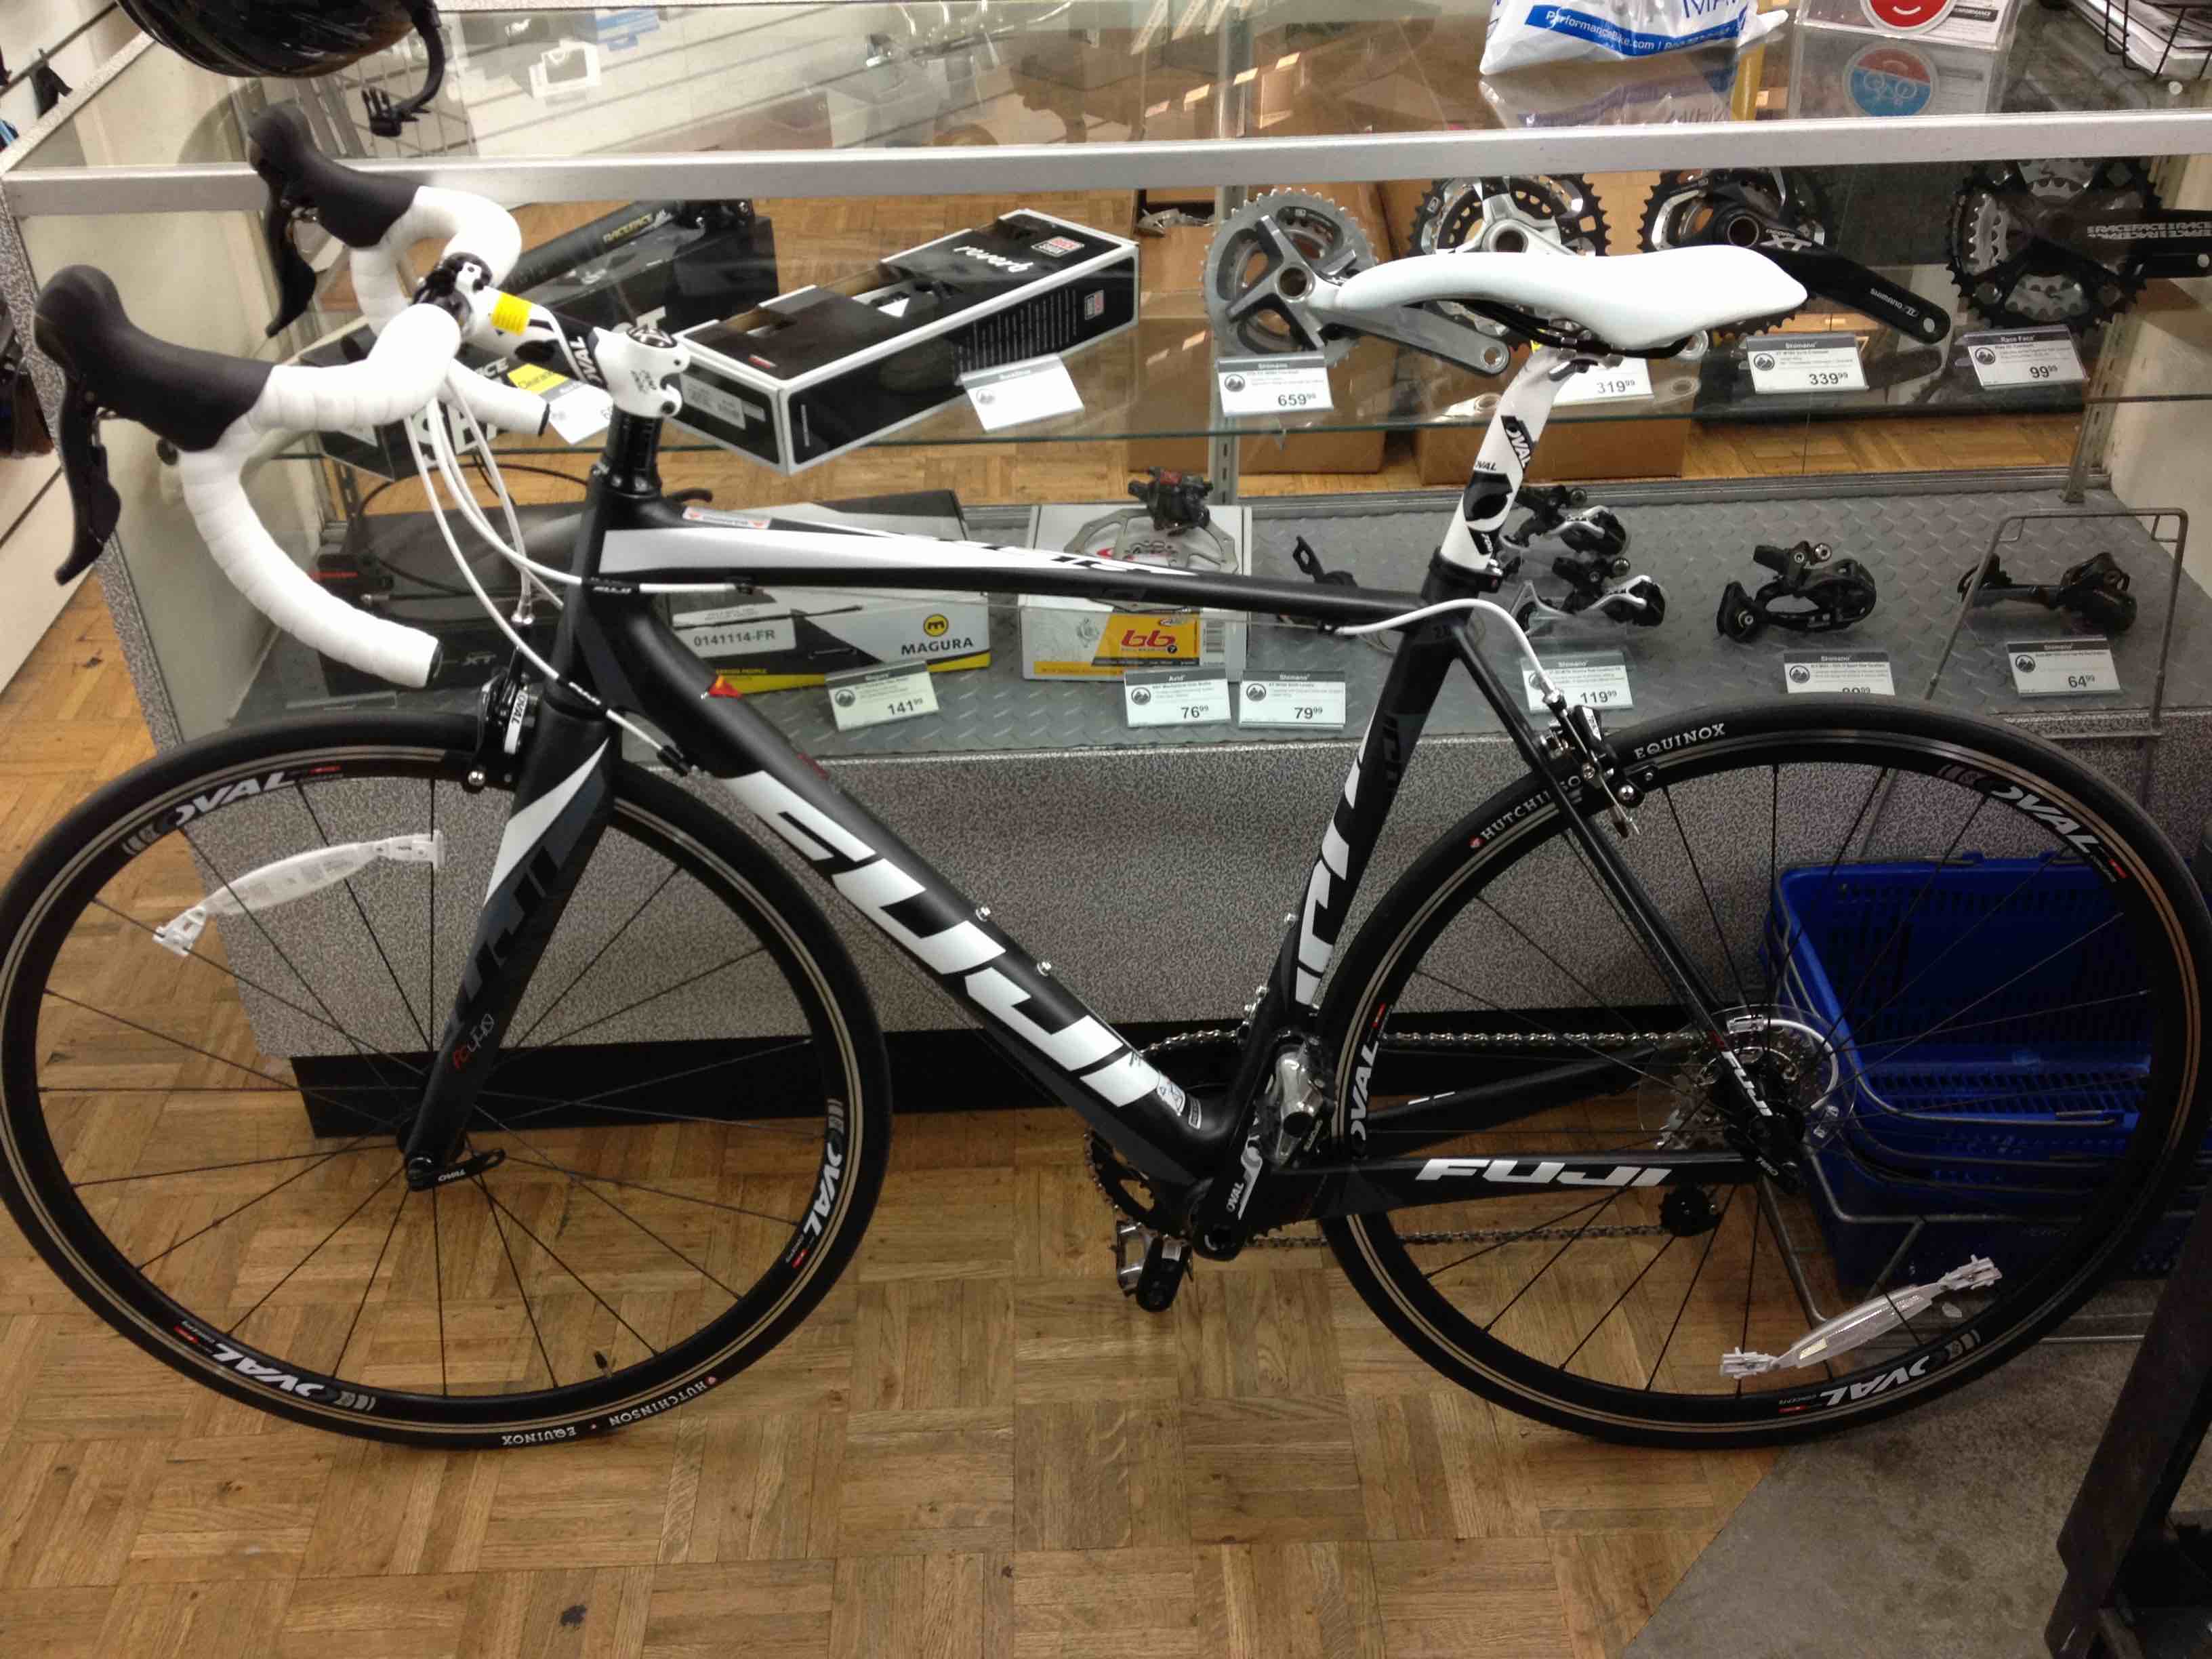 2013 Fuji Altamira first road bike leaning against glass in store at Performance Bicycle